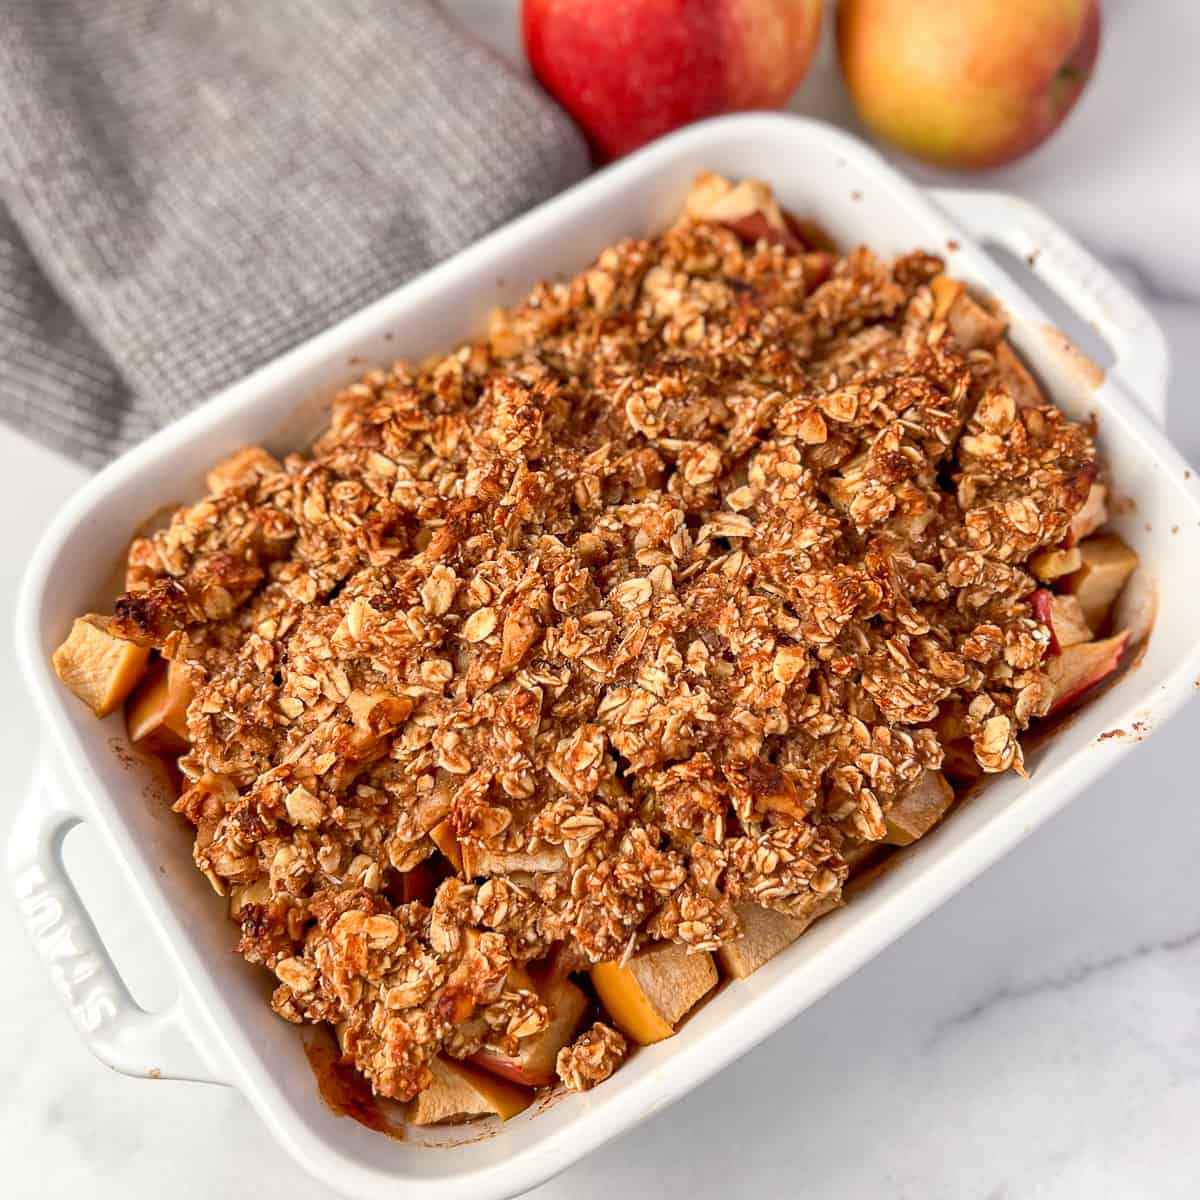 top view of vegan apple crisp in a white rectangular casserole dish; grey towel and apples blurred in the background